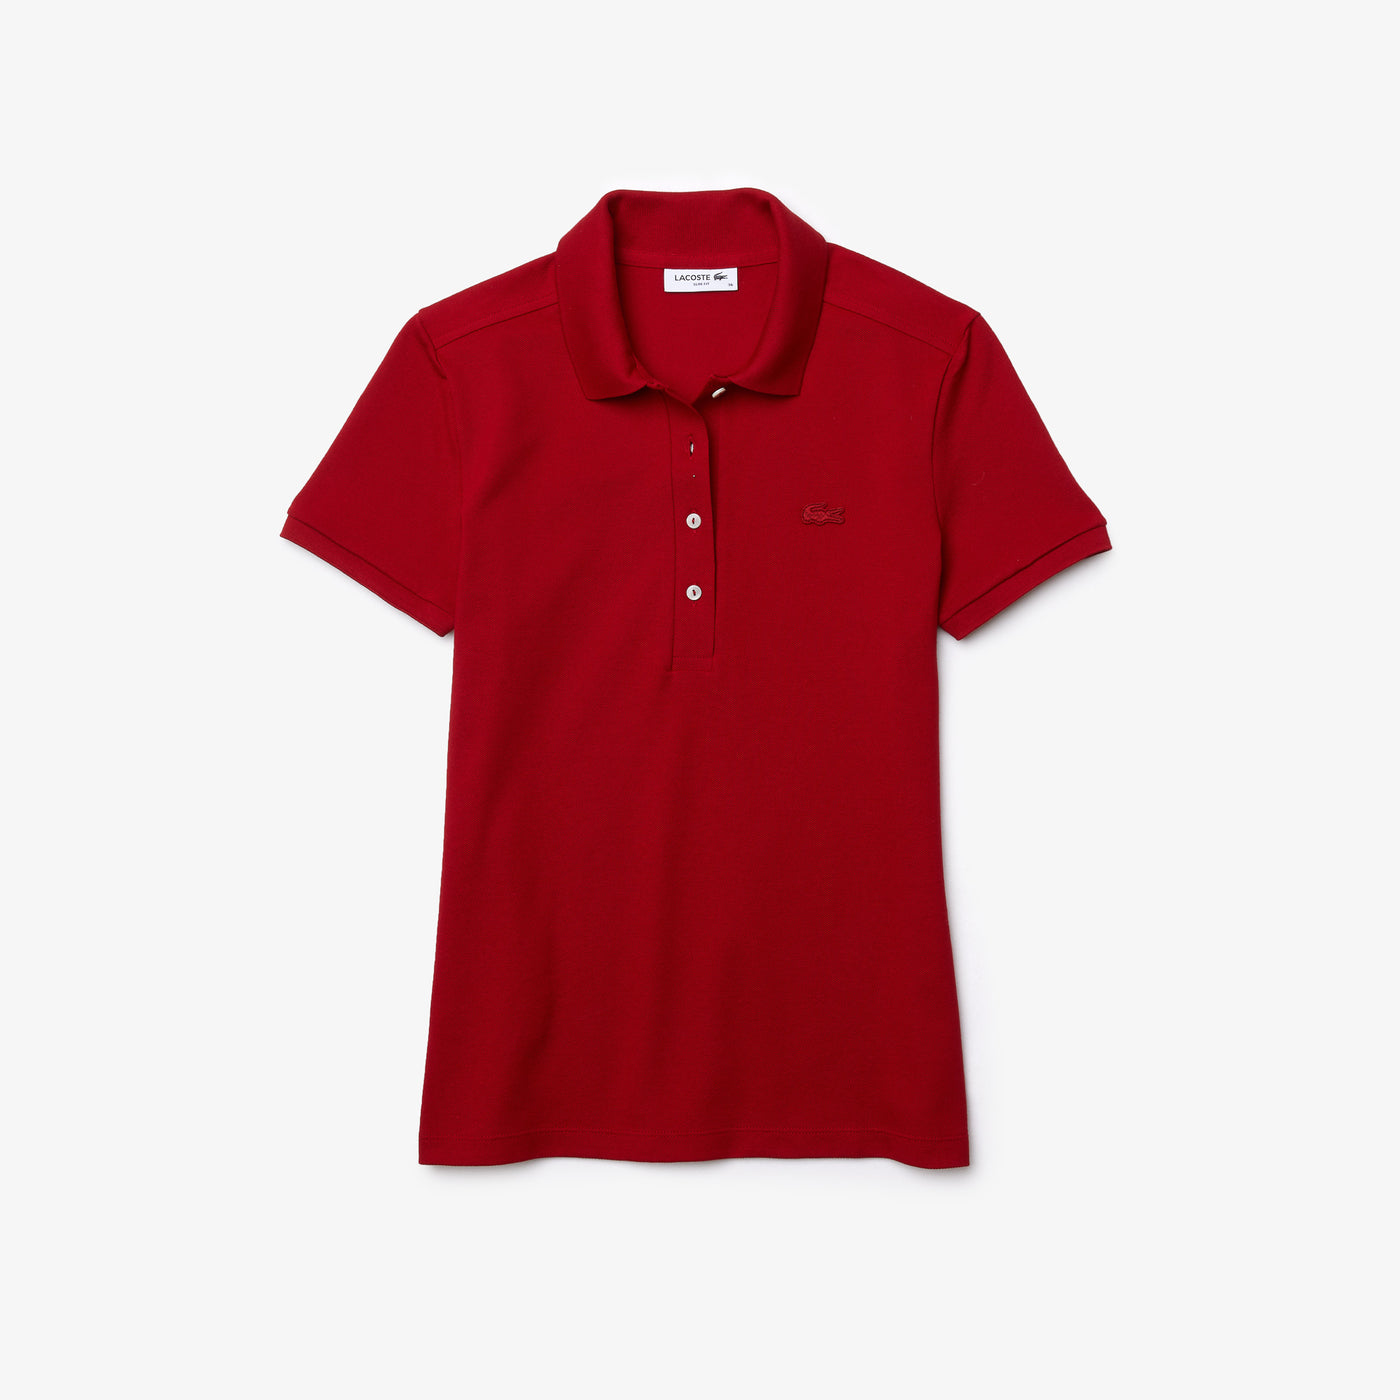 Shop The Latest Collection Of Outlet - Lacoste Women'S Lacoste Slim Fit Stretch Cotton Piquã© Polo Shirt - Pf5462 In Lebanon